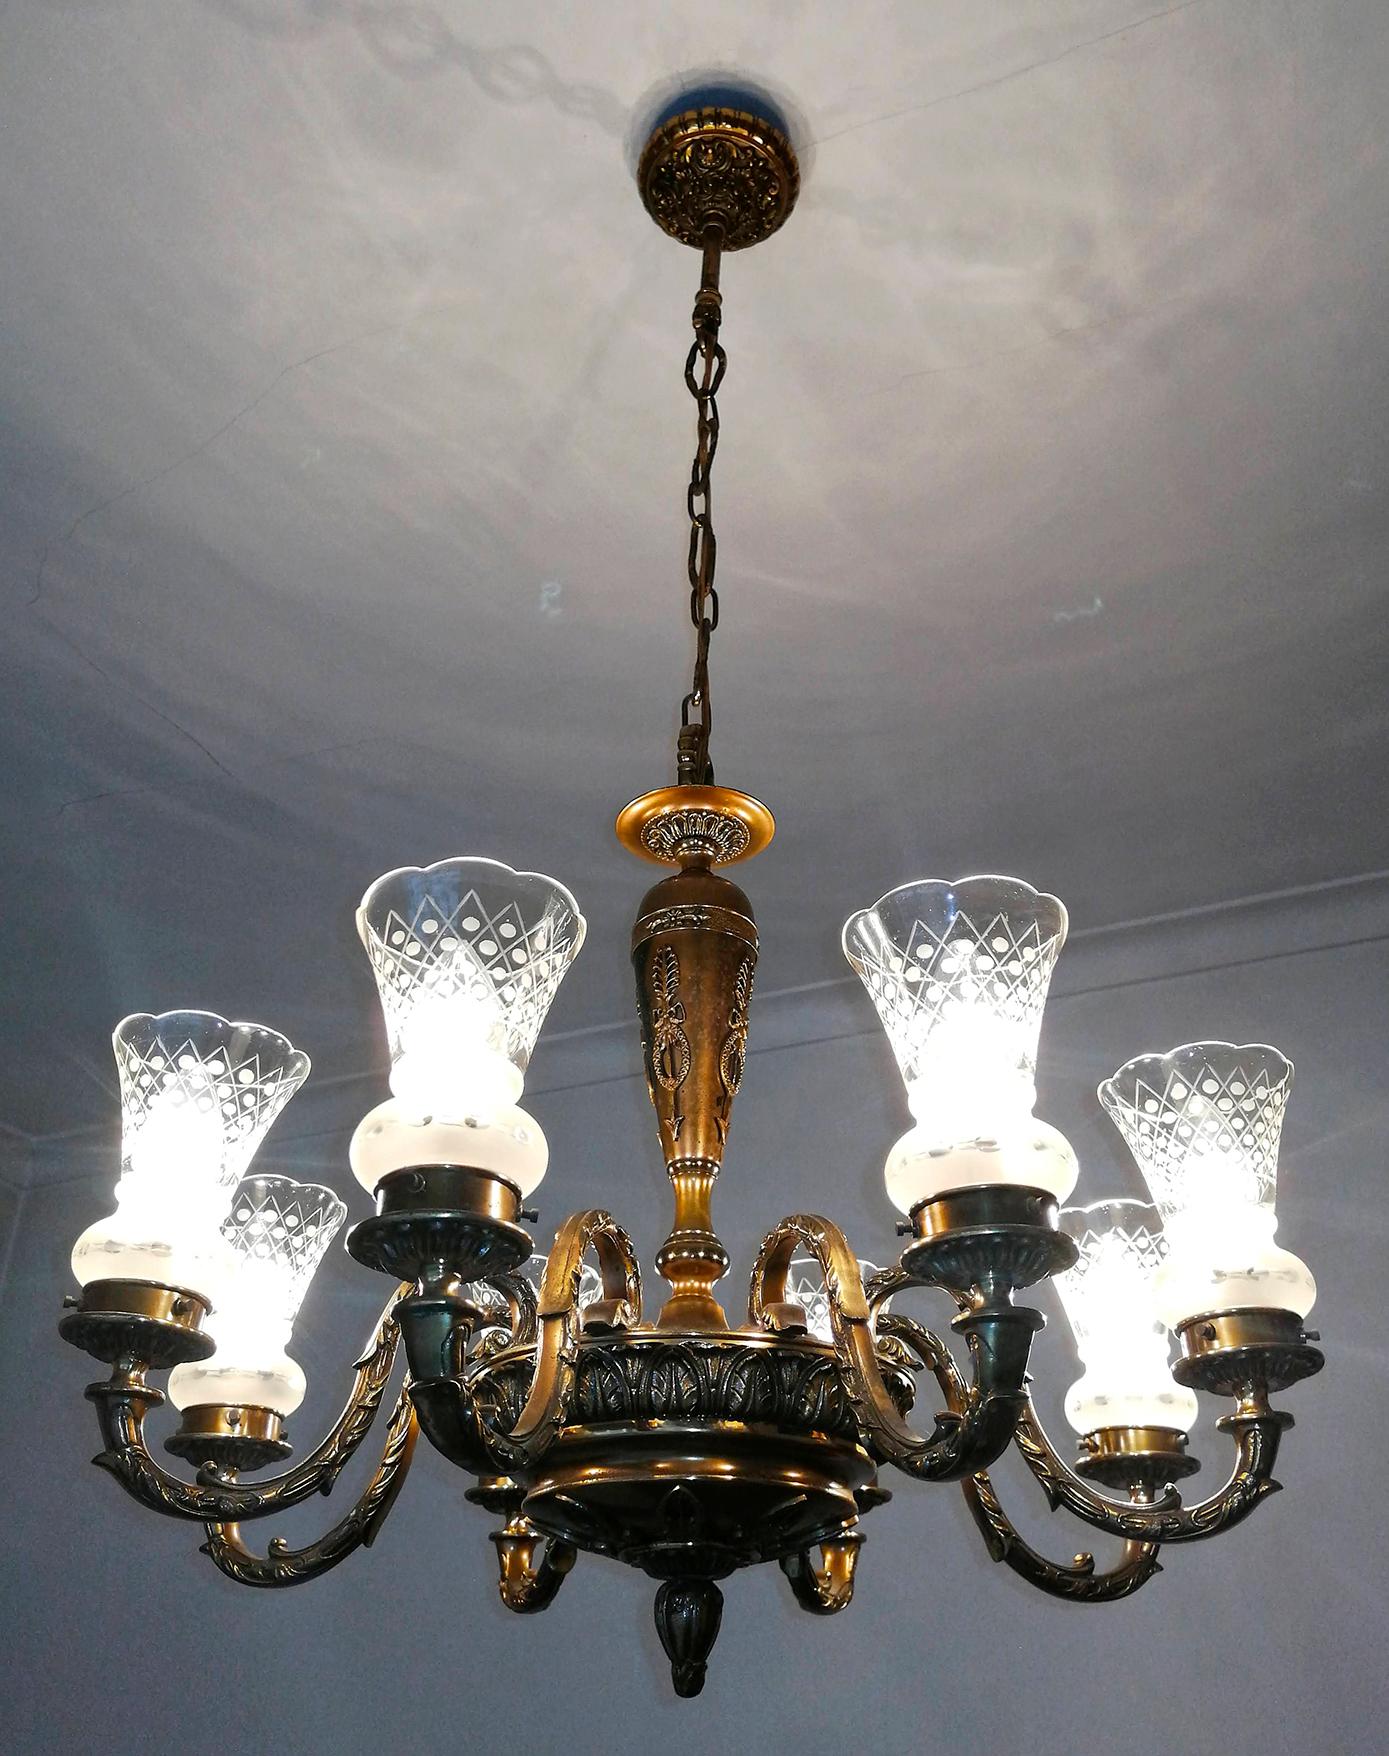 Antique French Empire Neoclassical Gilt Bronze Chandelier, Early 20th Century For Sale 4